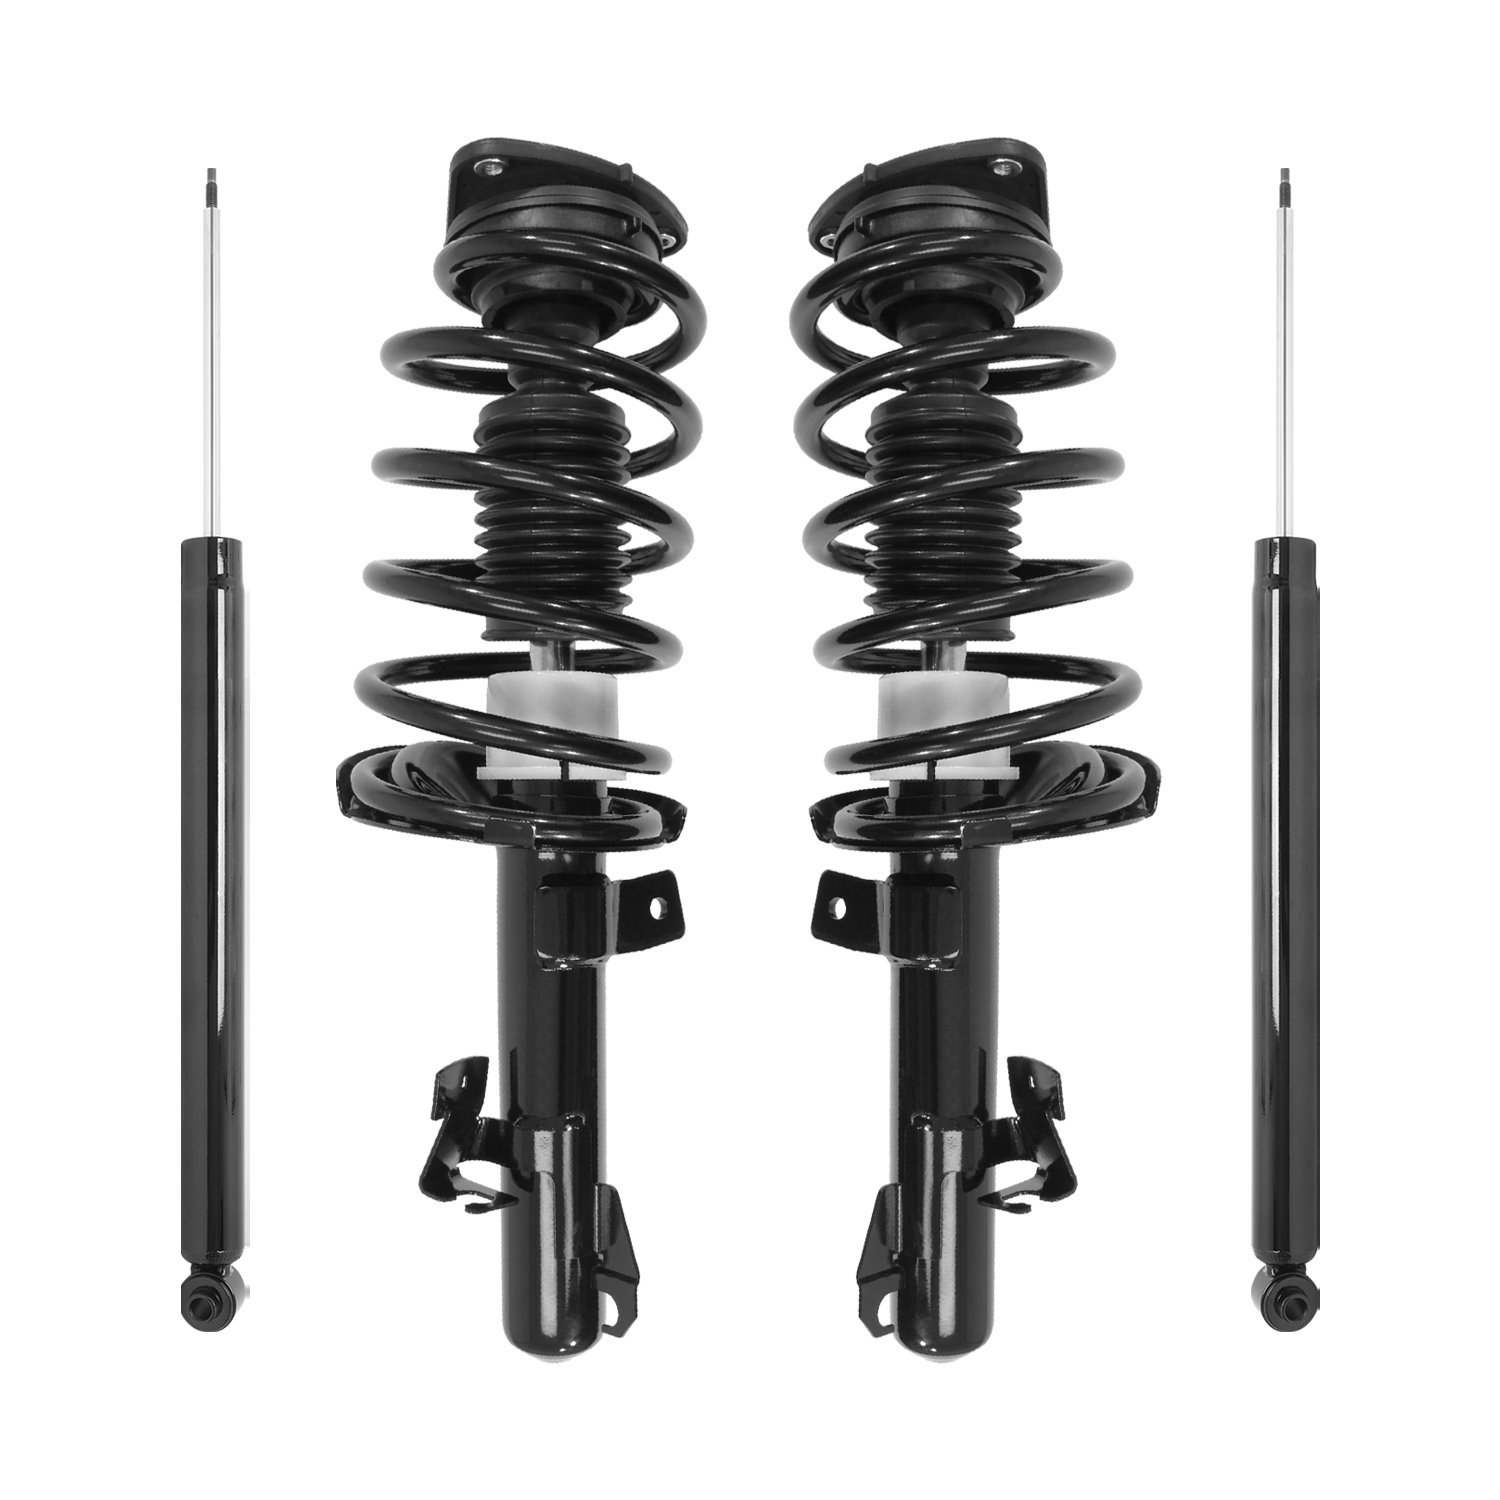 4-13083-259020-001 Front & Rear Suspension Strut & Coil Spring Assembly Fits Select Mazda 5